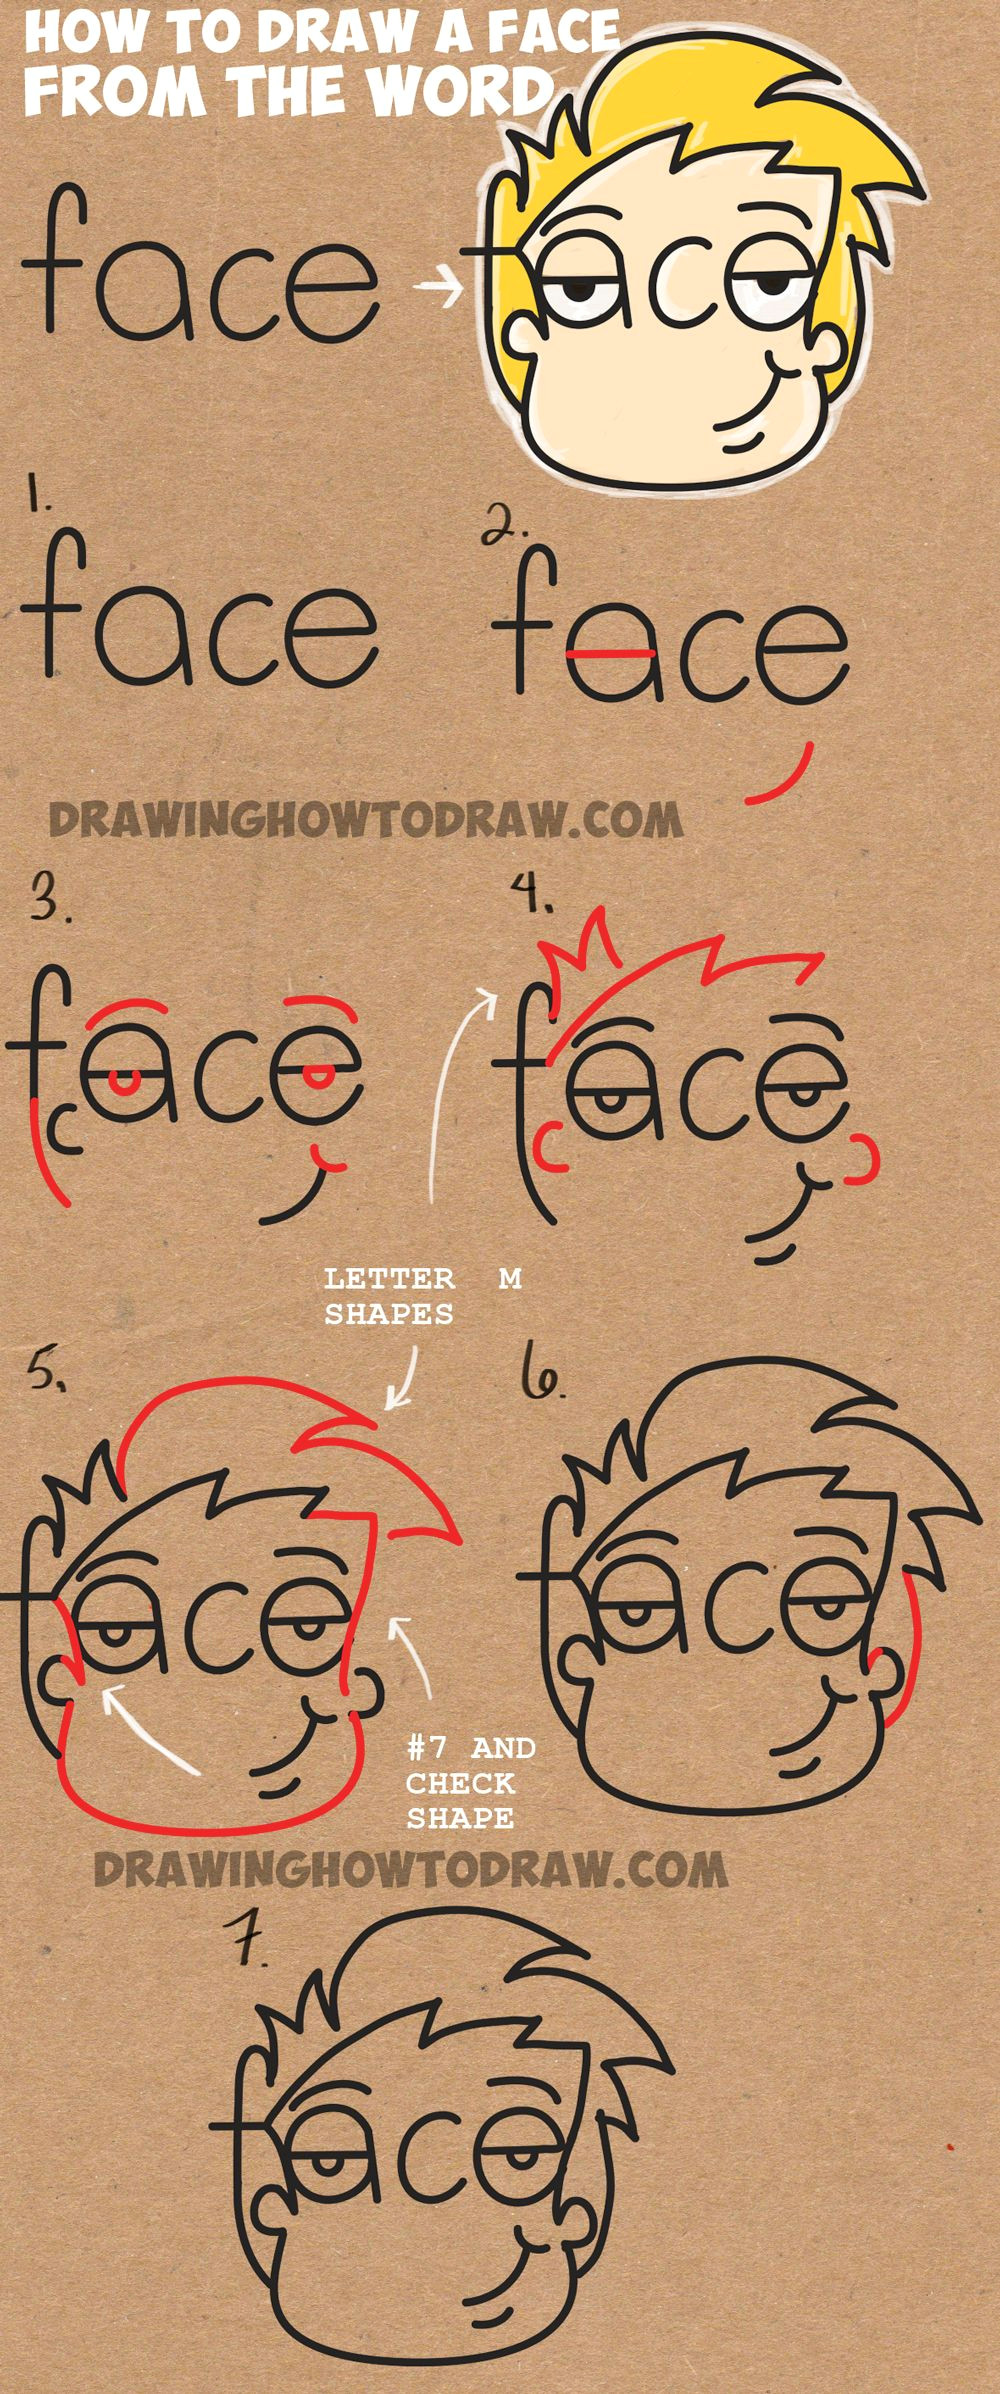 Easy Drawing Using Letters How to Draw Cartoon Faces From the Word Face Easy Step by Step